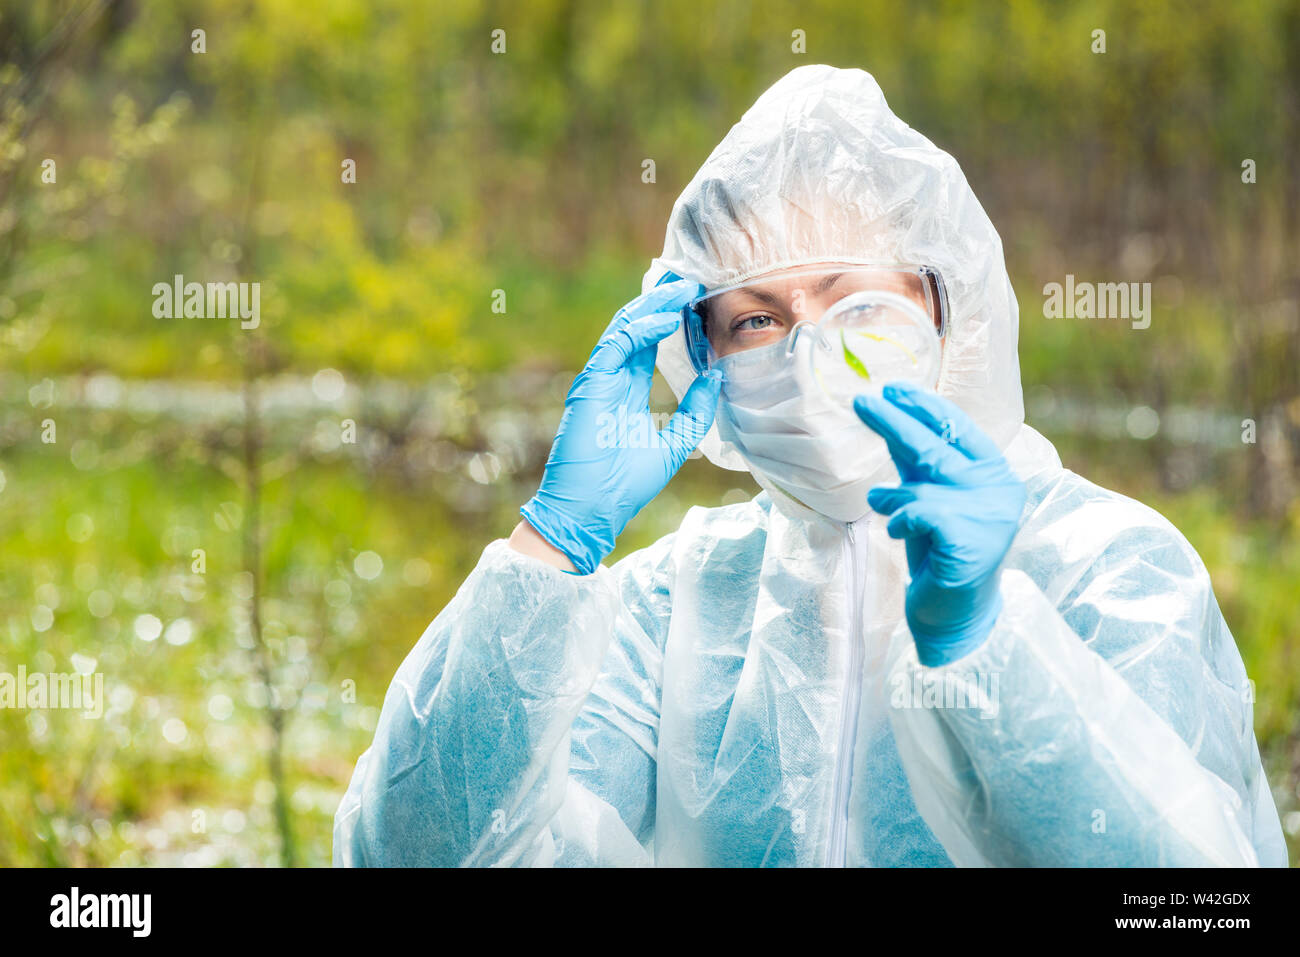 chemist researcher in protective clothing examines infected plants from a forest lake Stock Photo